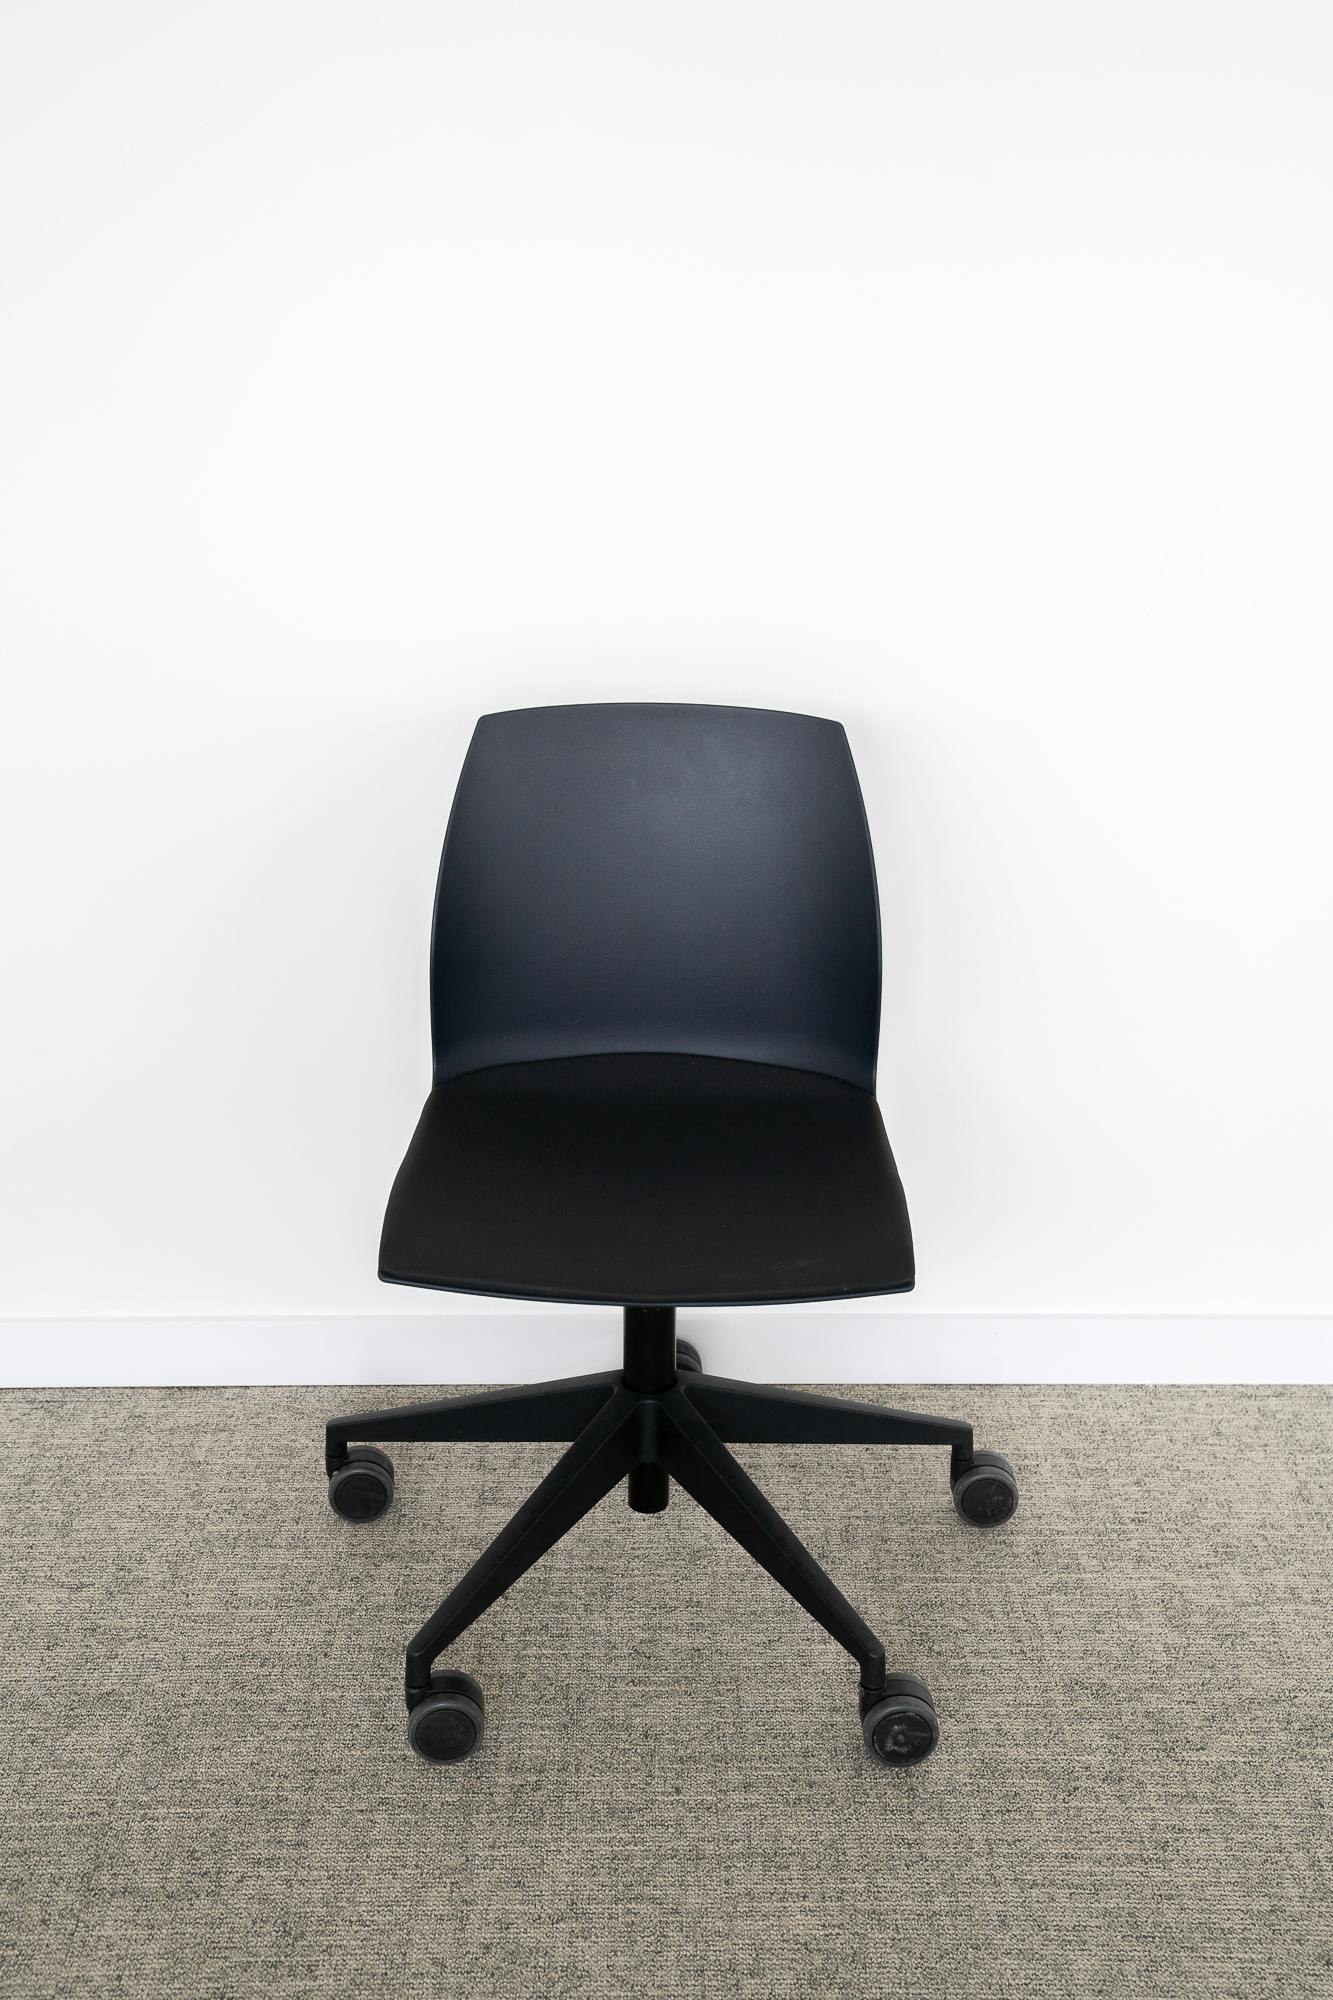 Black office chair KASTEL - Second hand quality "Office chairs" - Relieve Furniture - 1